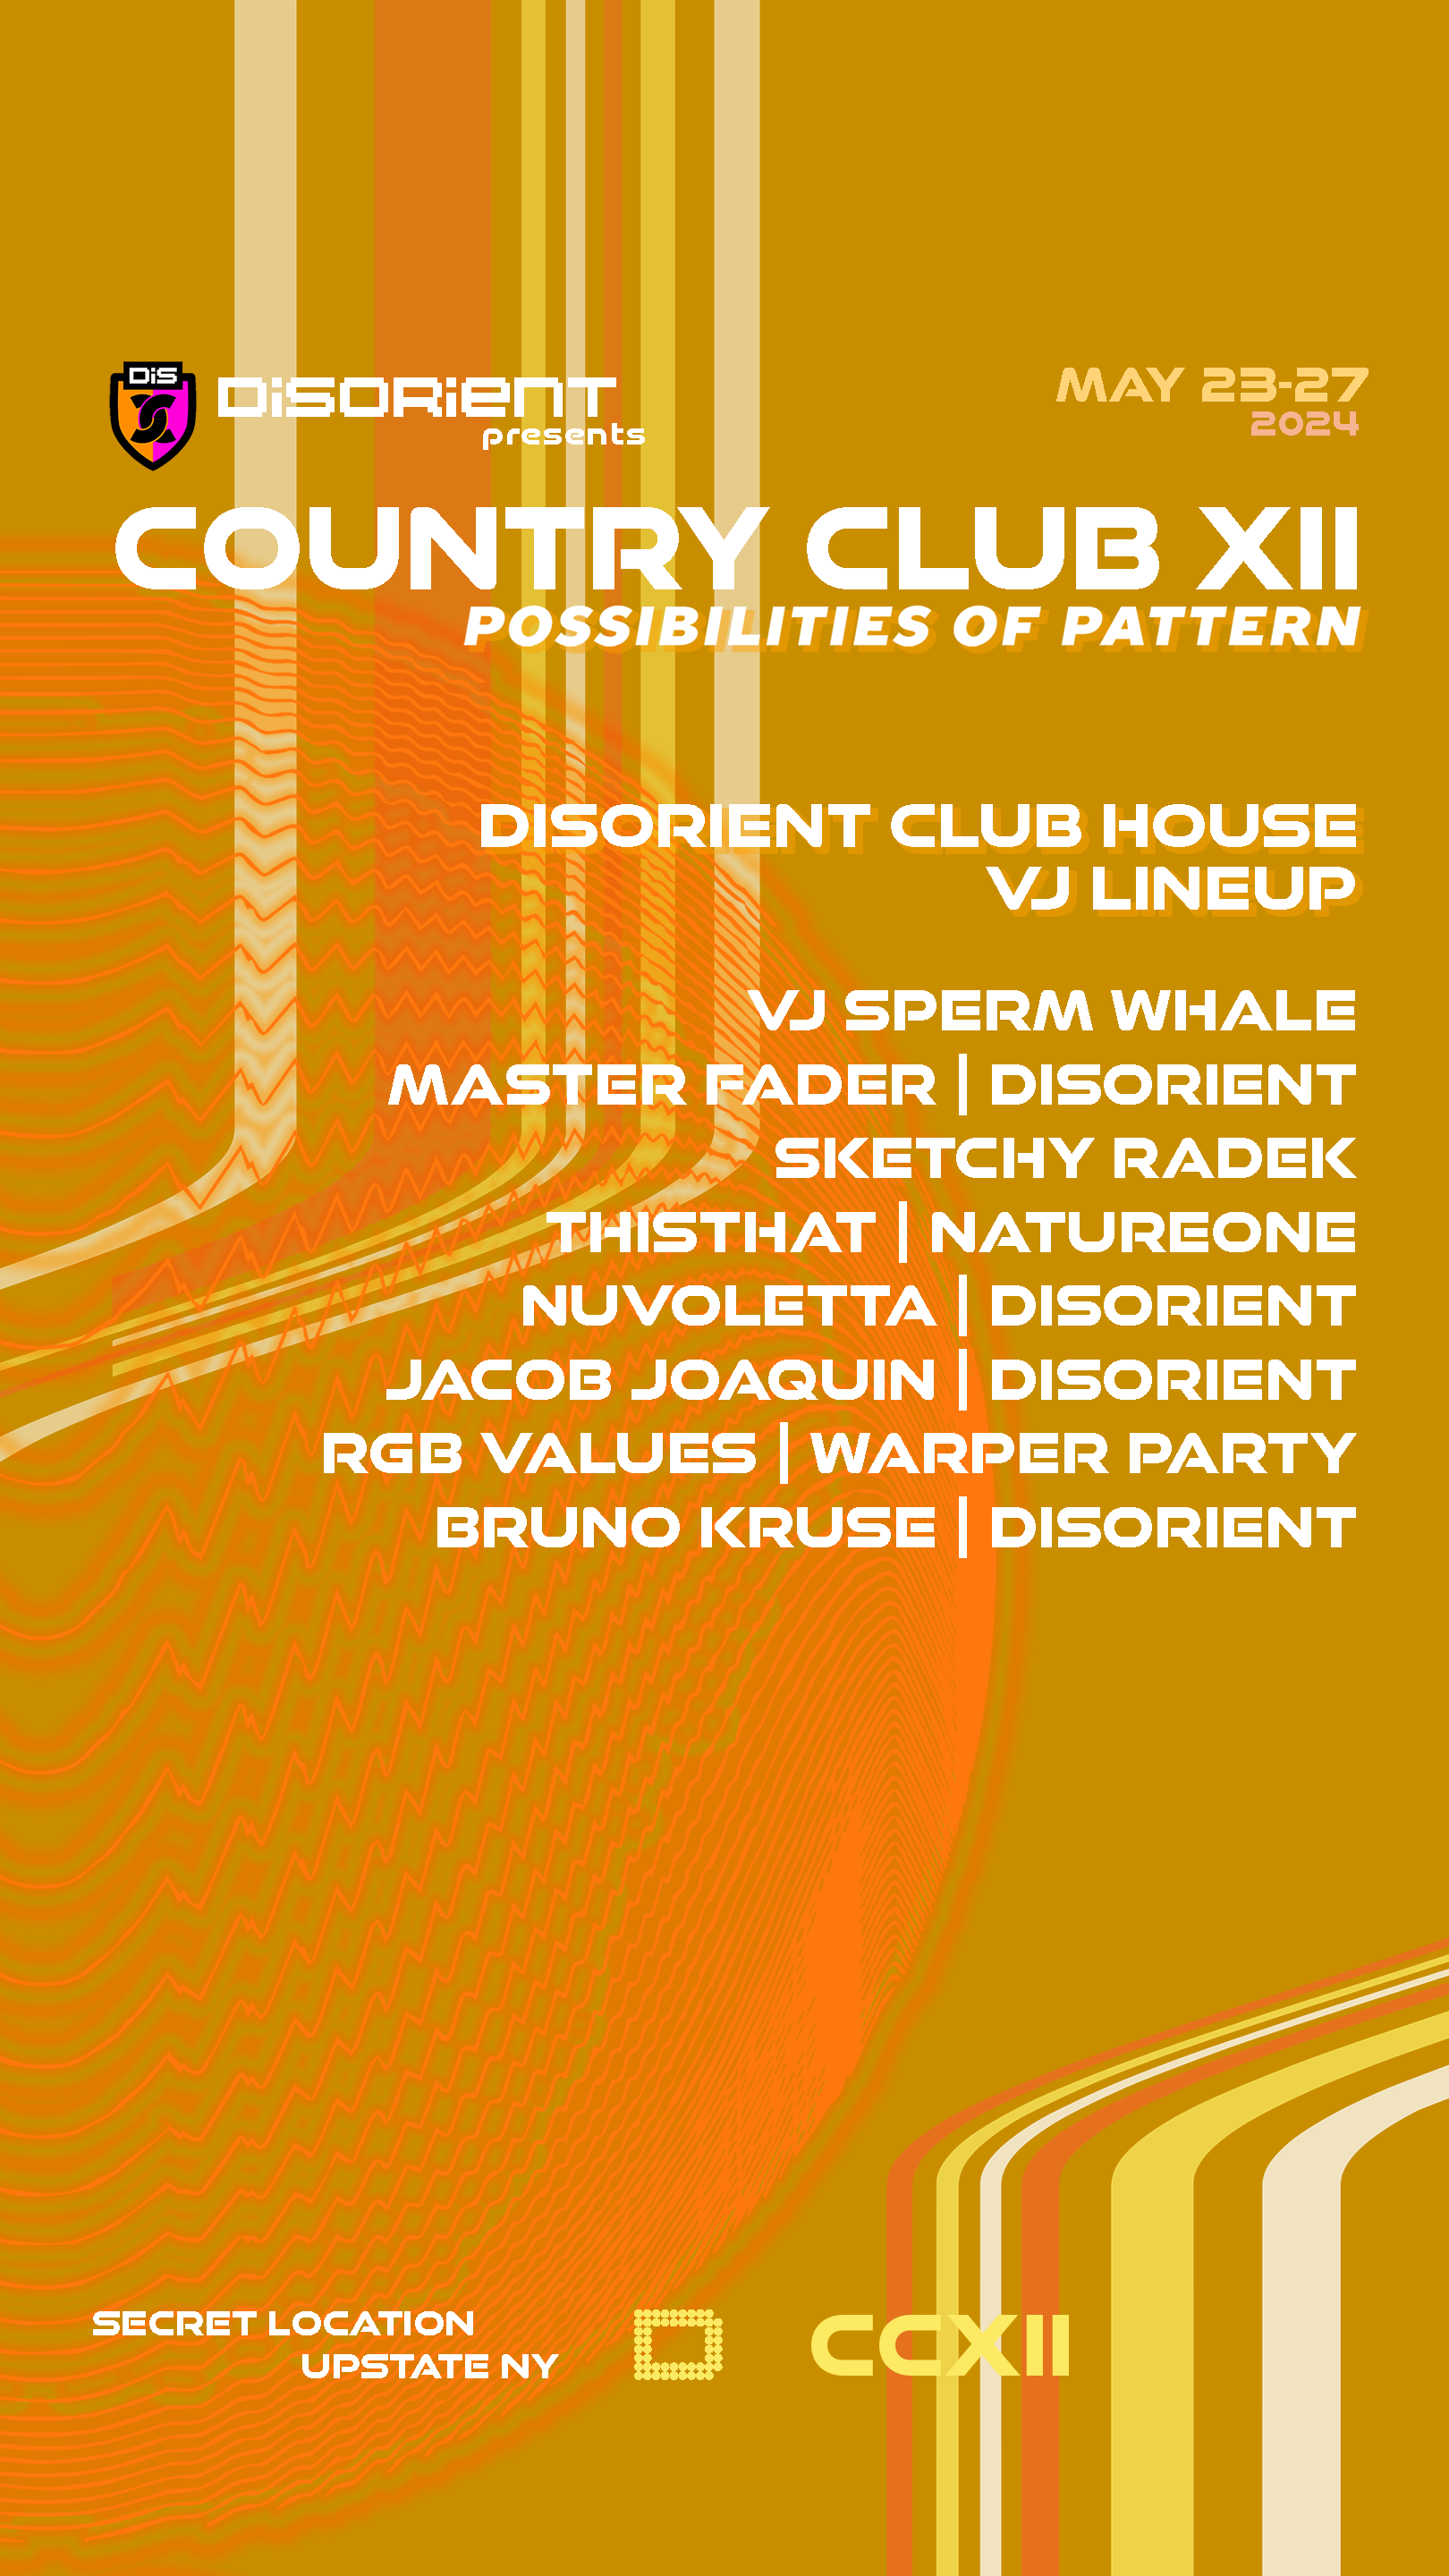 disorient country club